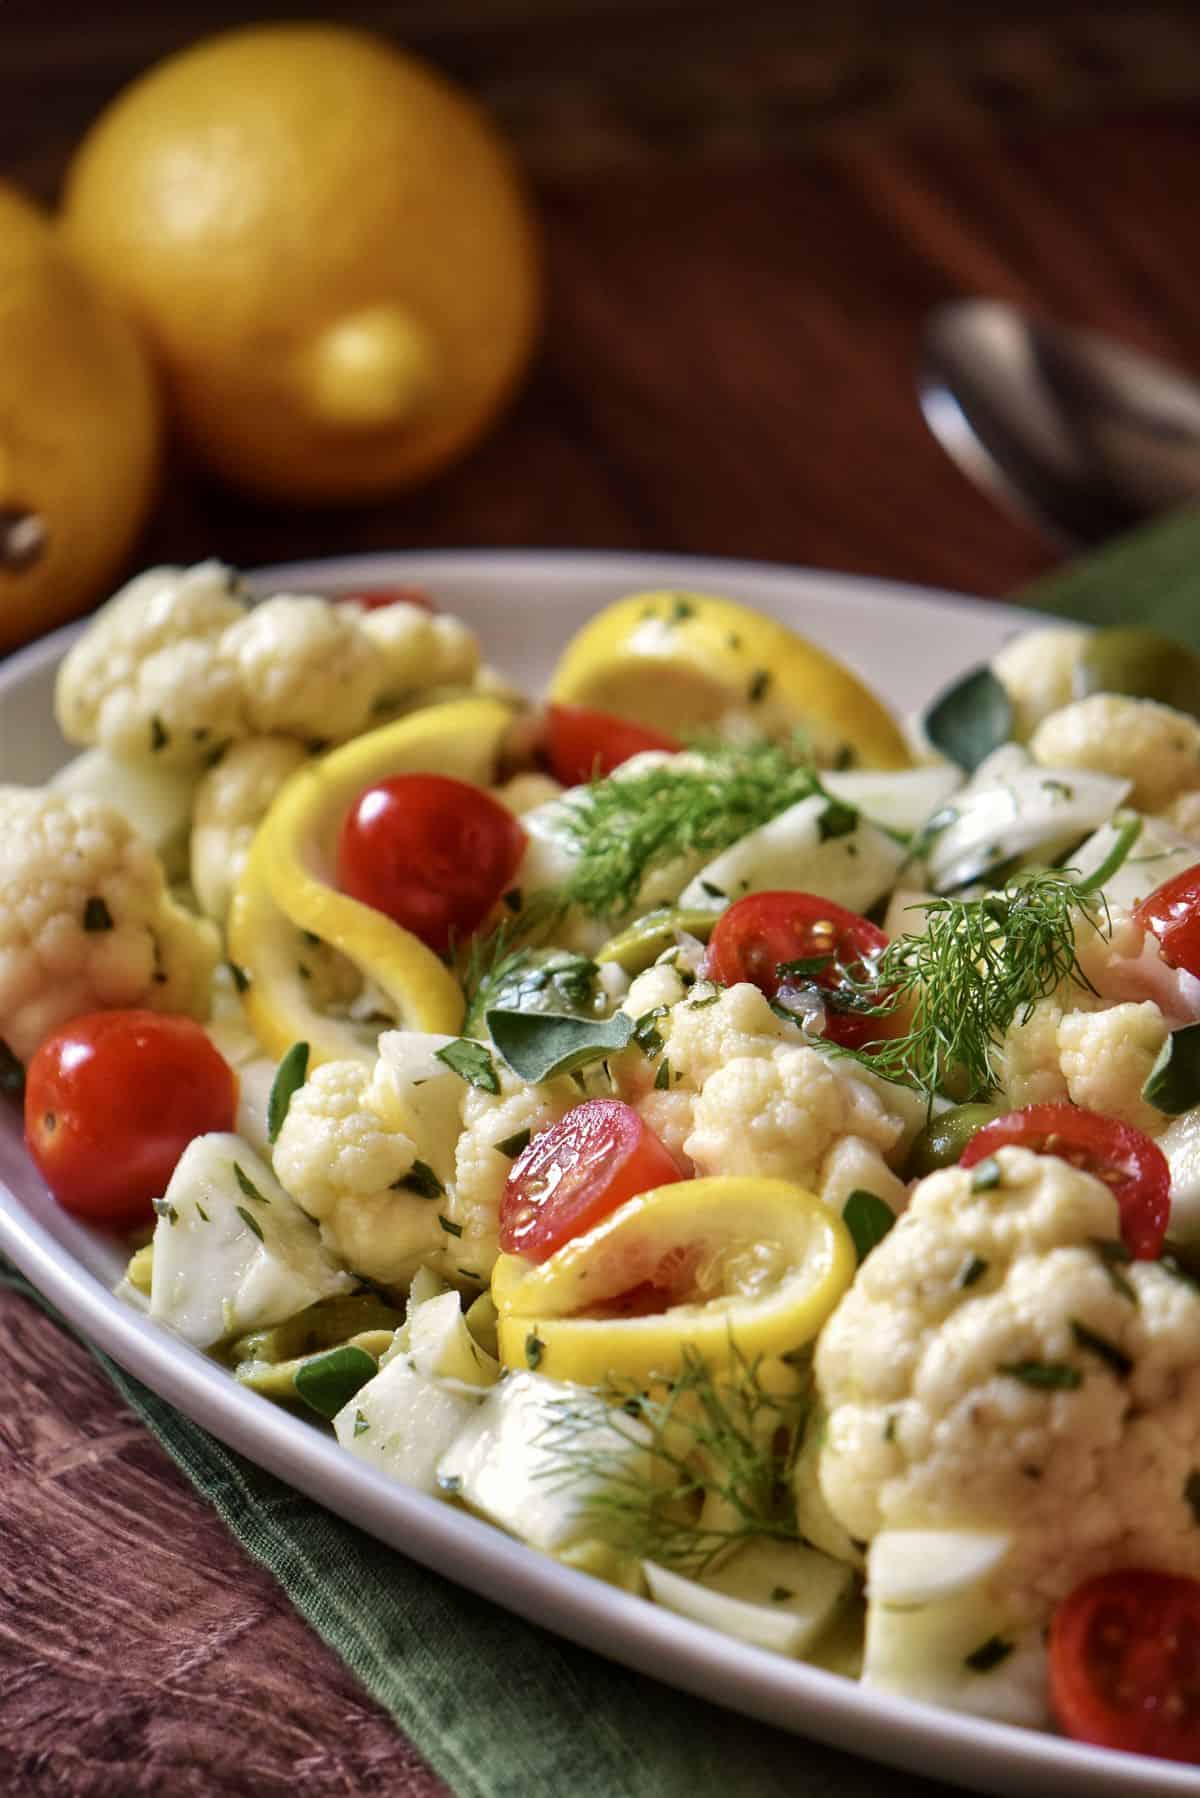 A colorful and unique salad recipe with cauliflower, fennel and cherry tomatoes.